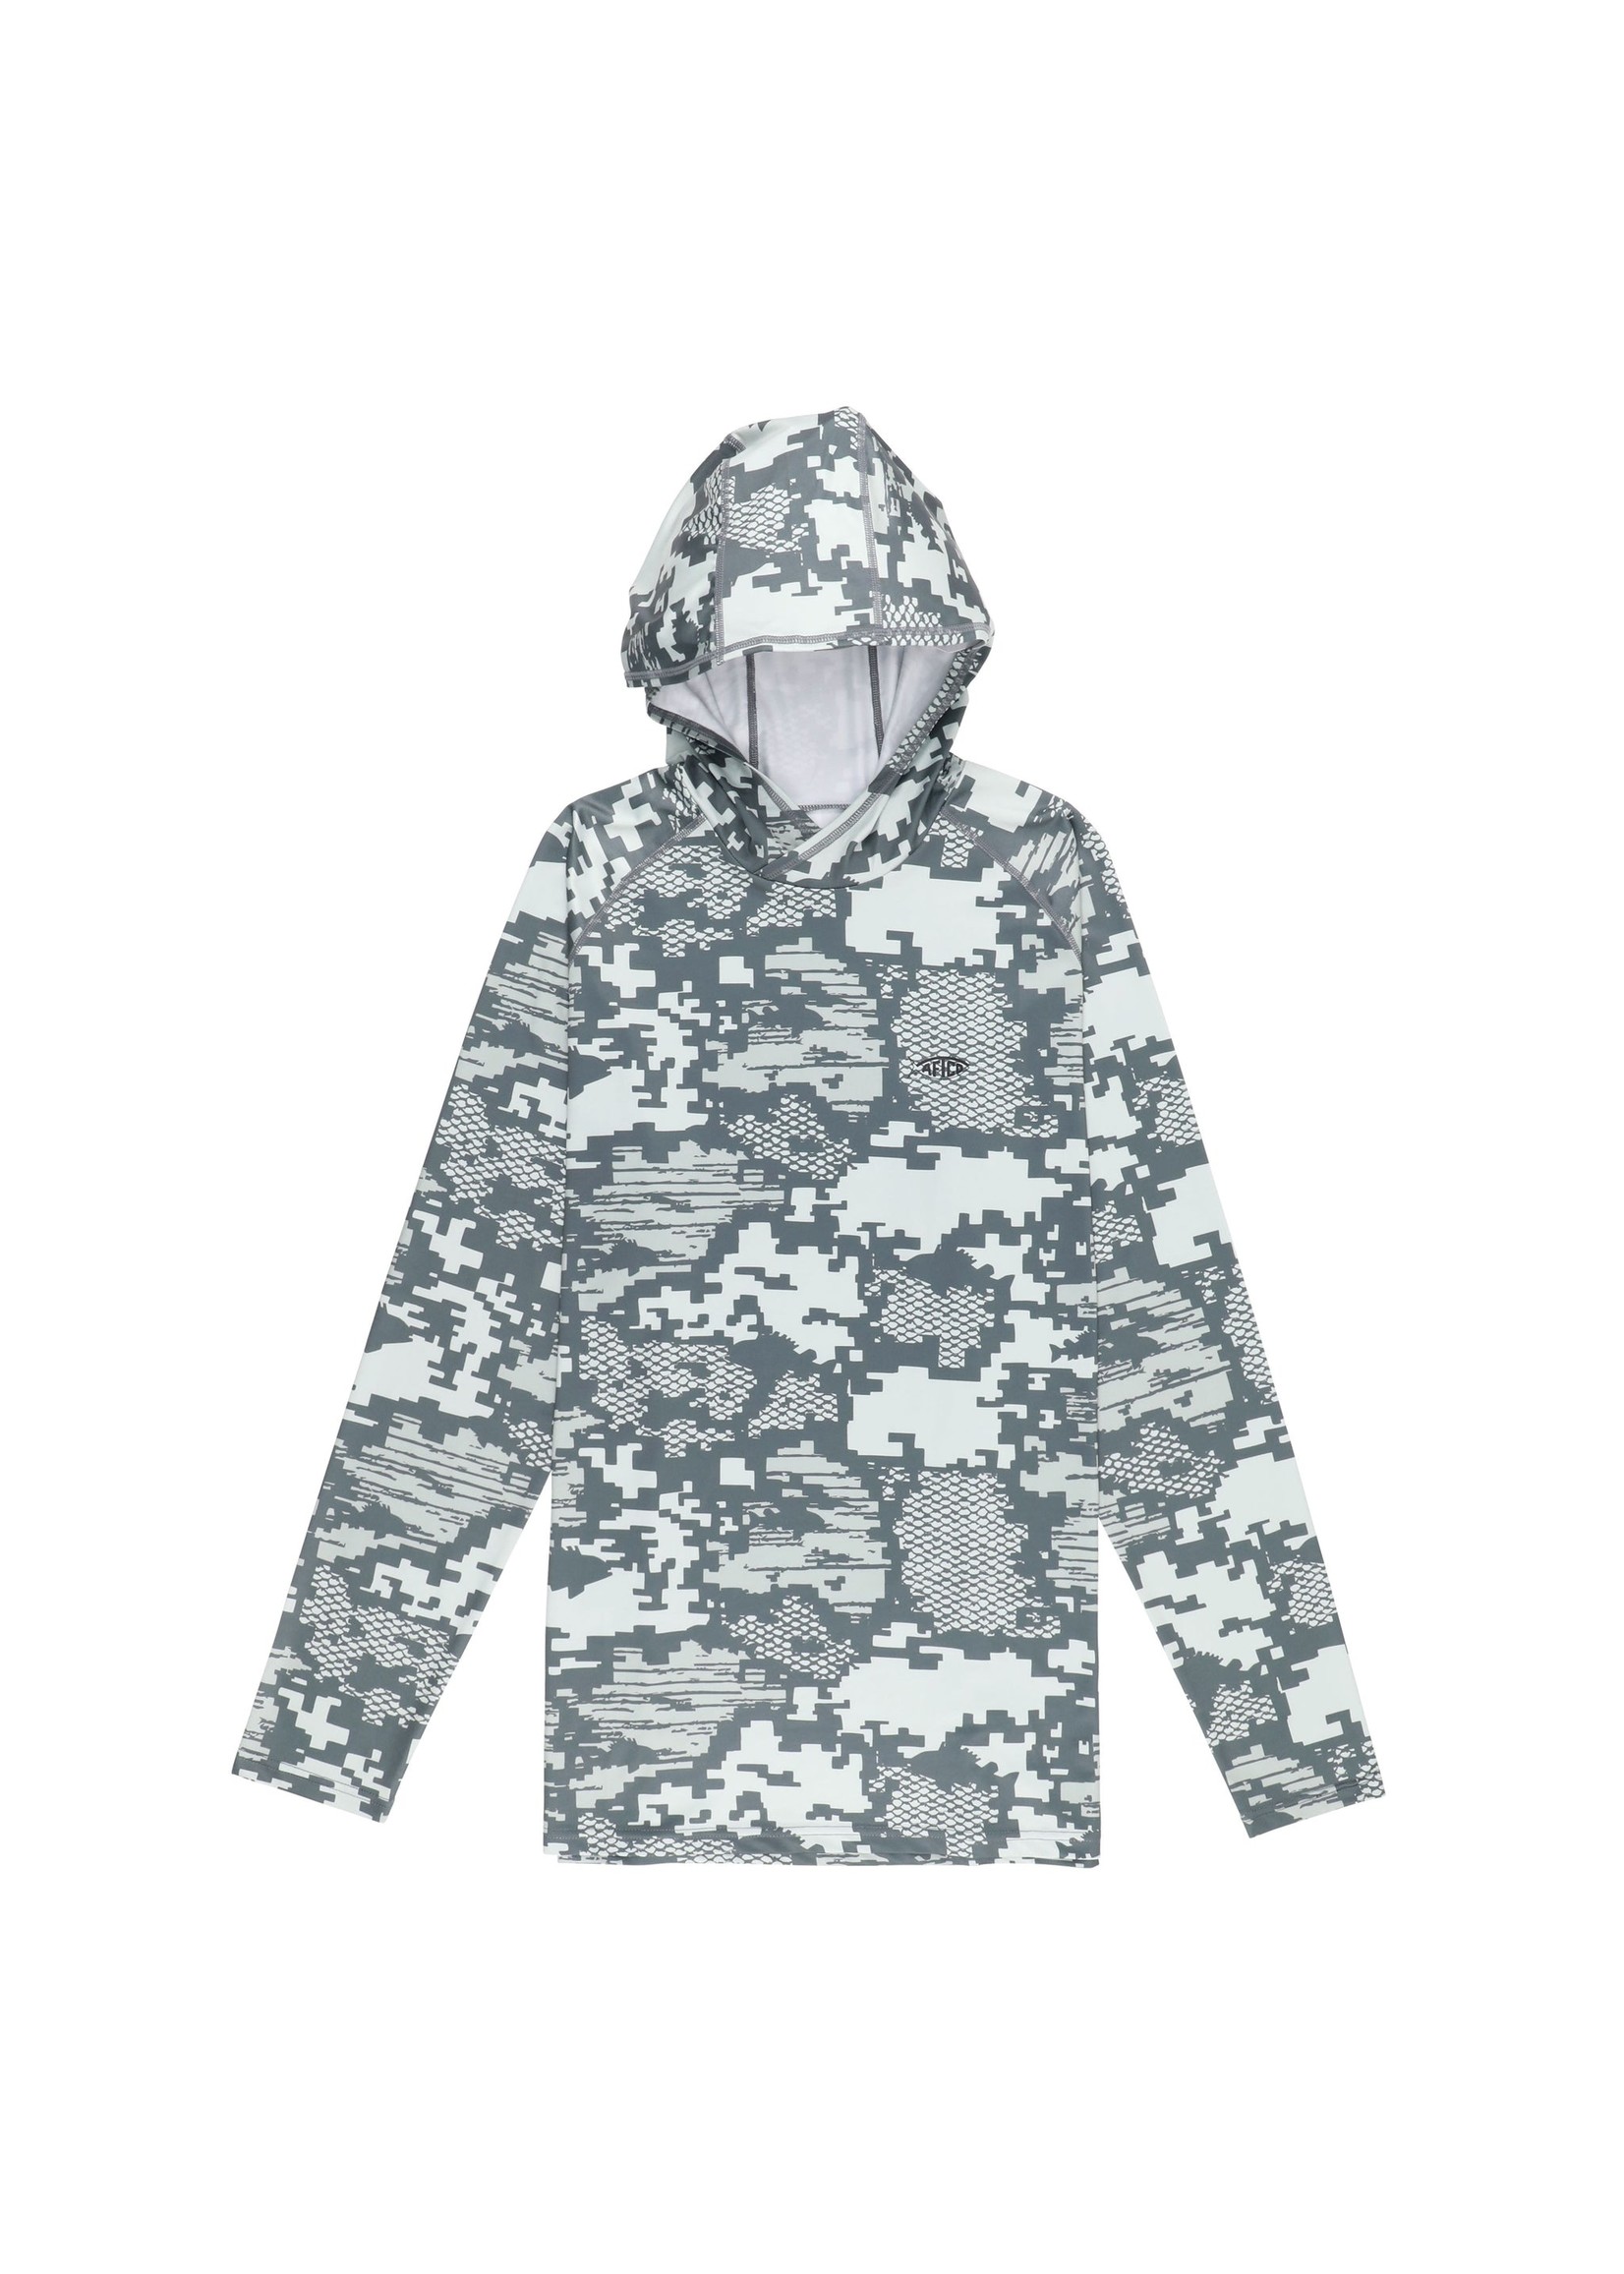 AFTCO Tactical Hooded LS Performance Shirt